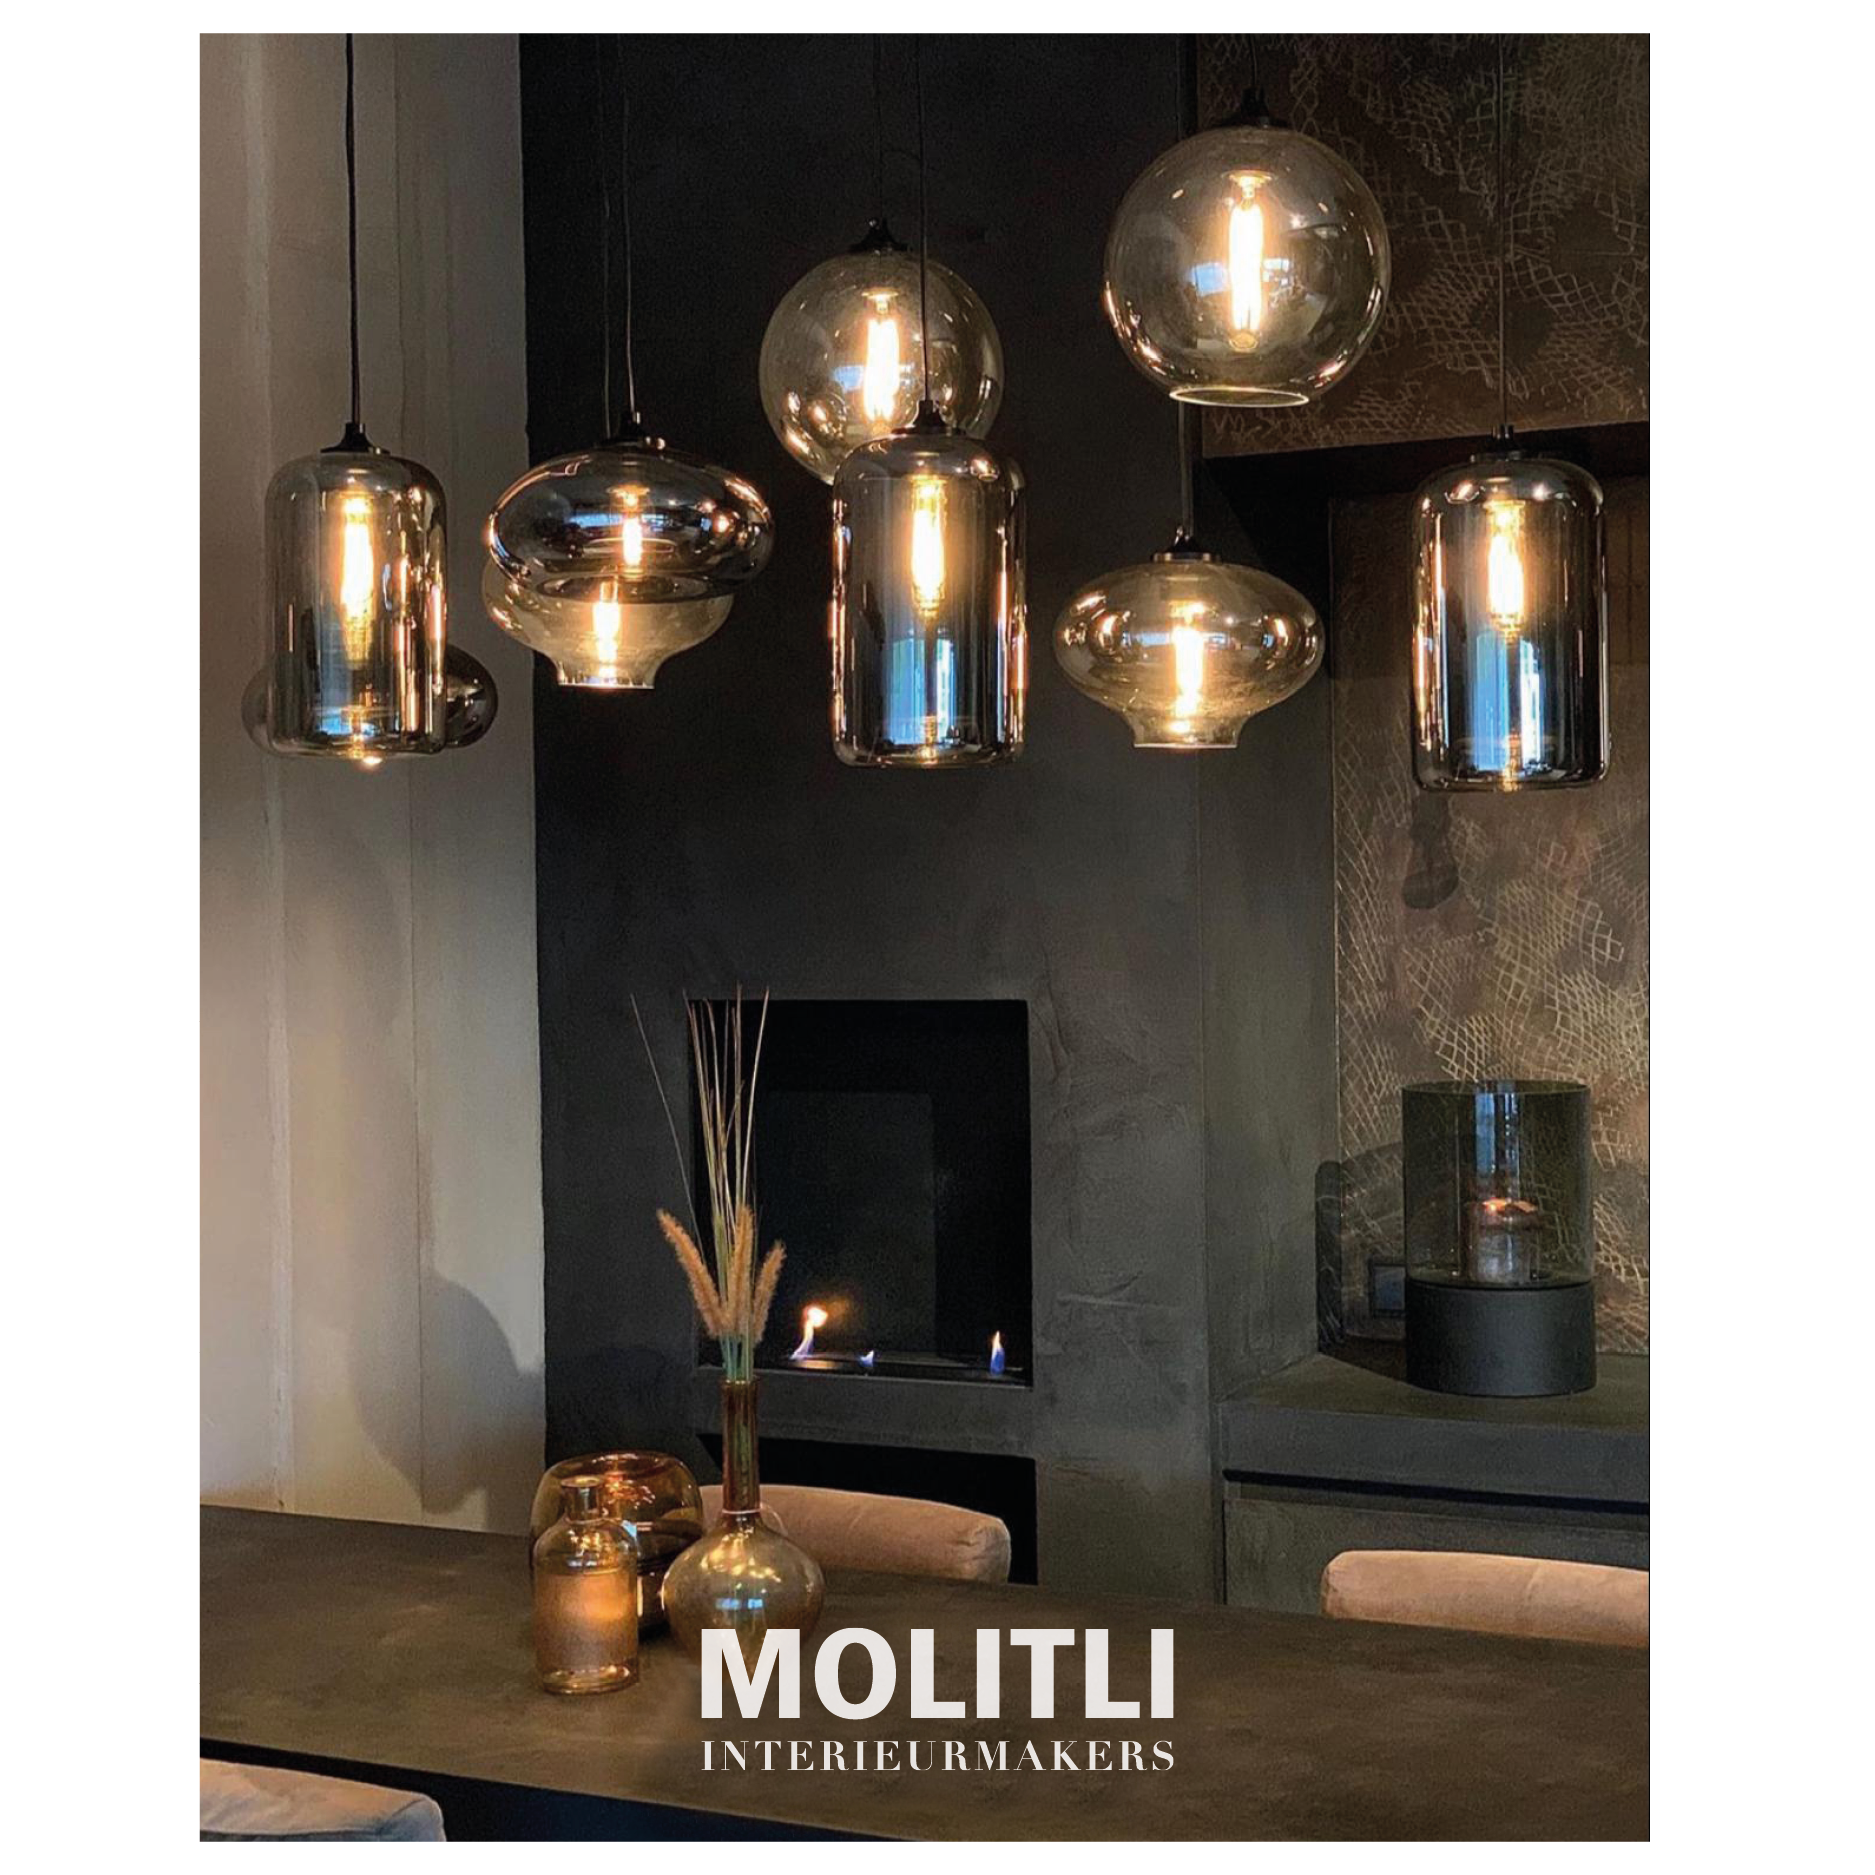 By eve Bulb - Zepp - molitli interieurmakers bv